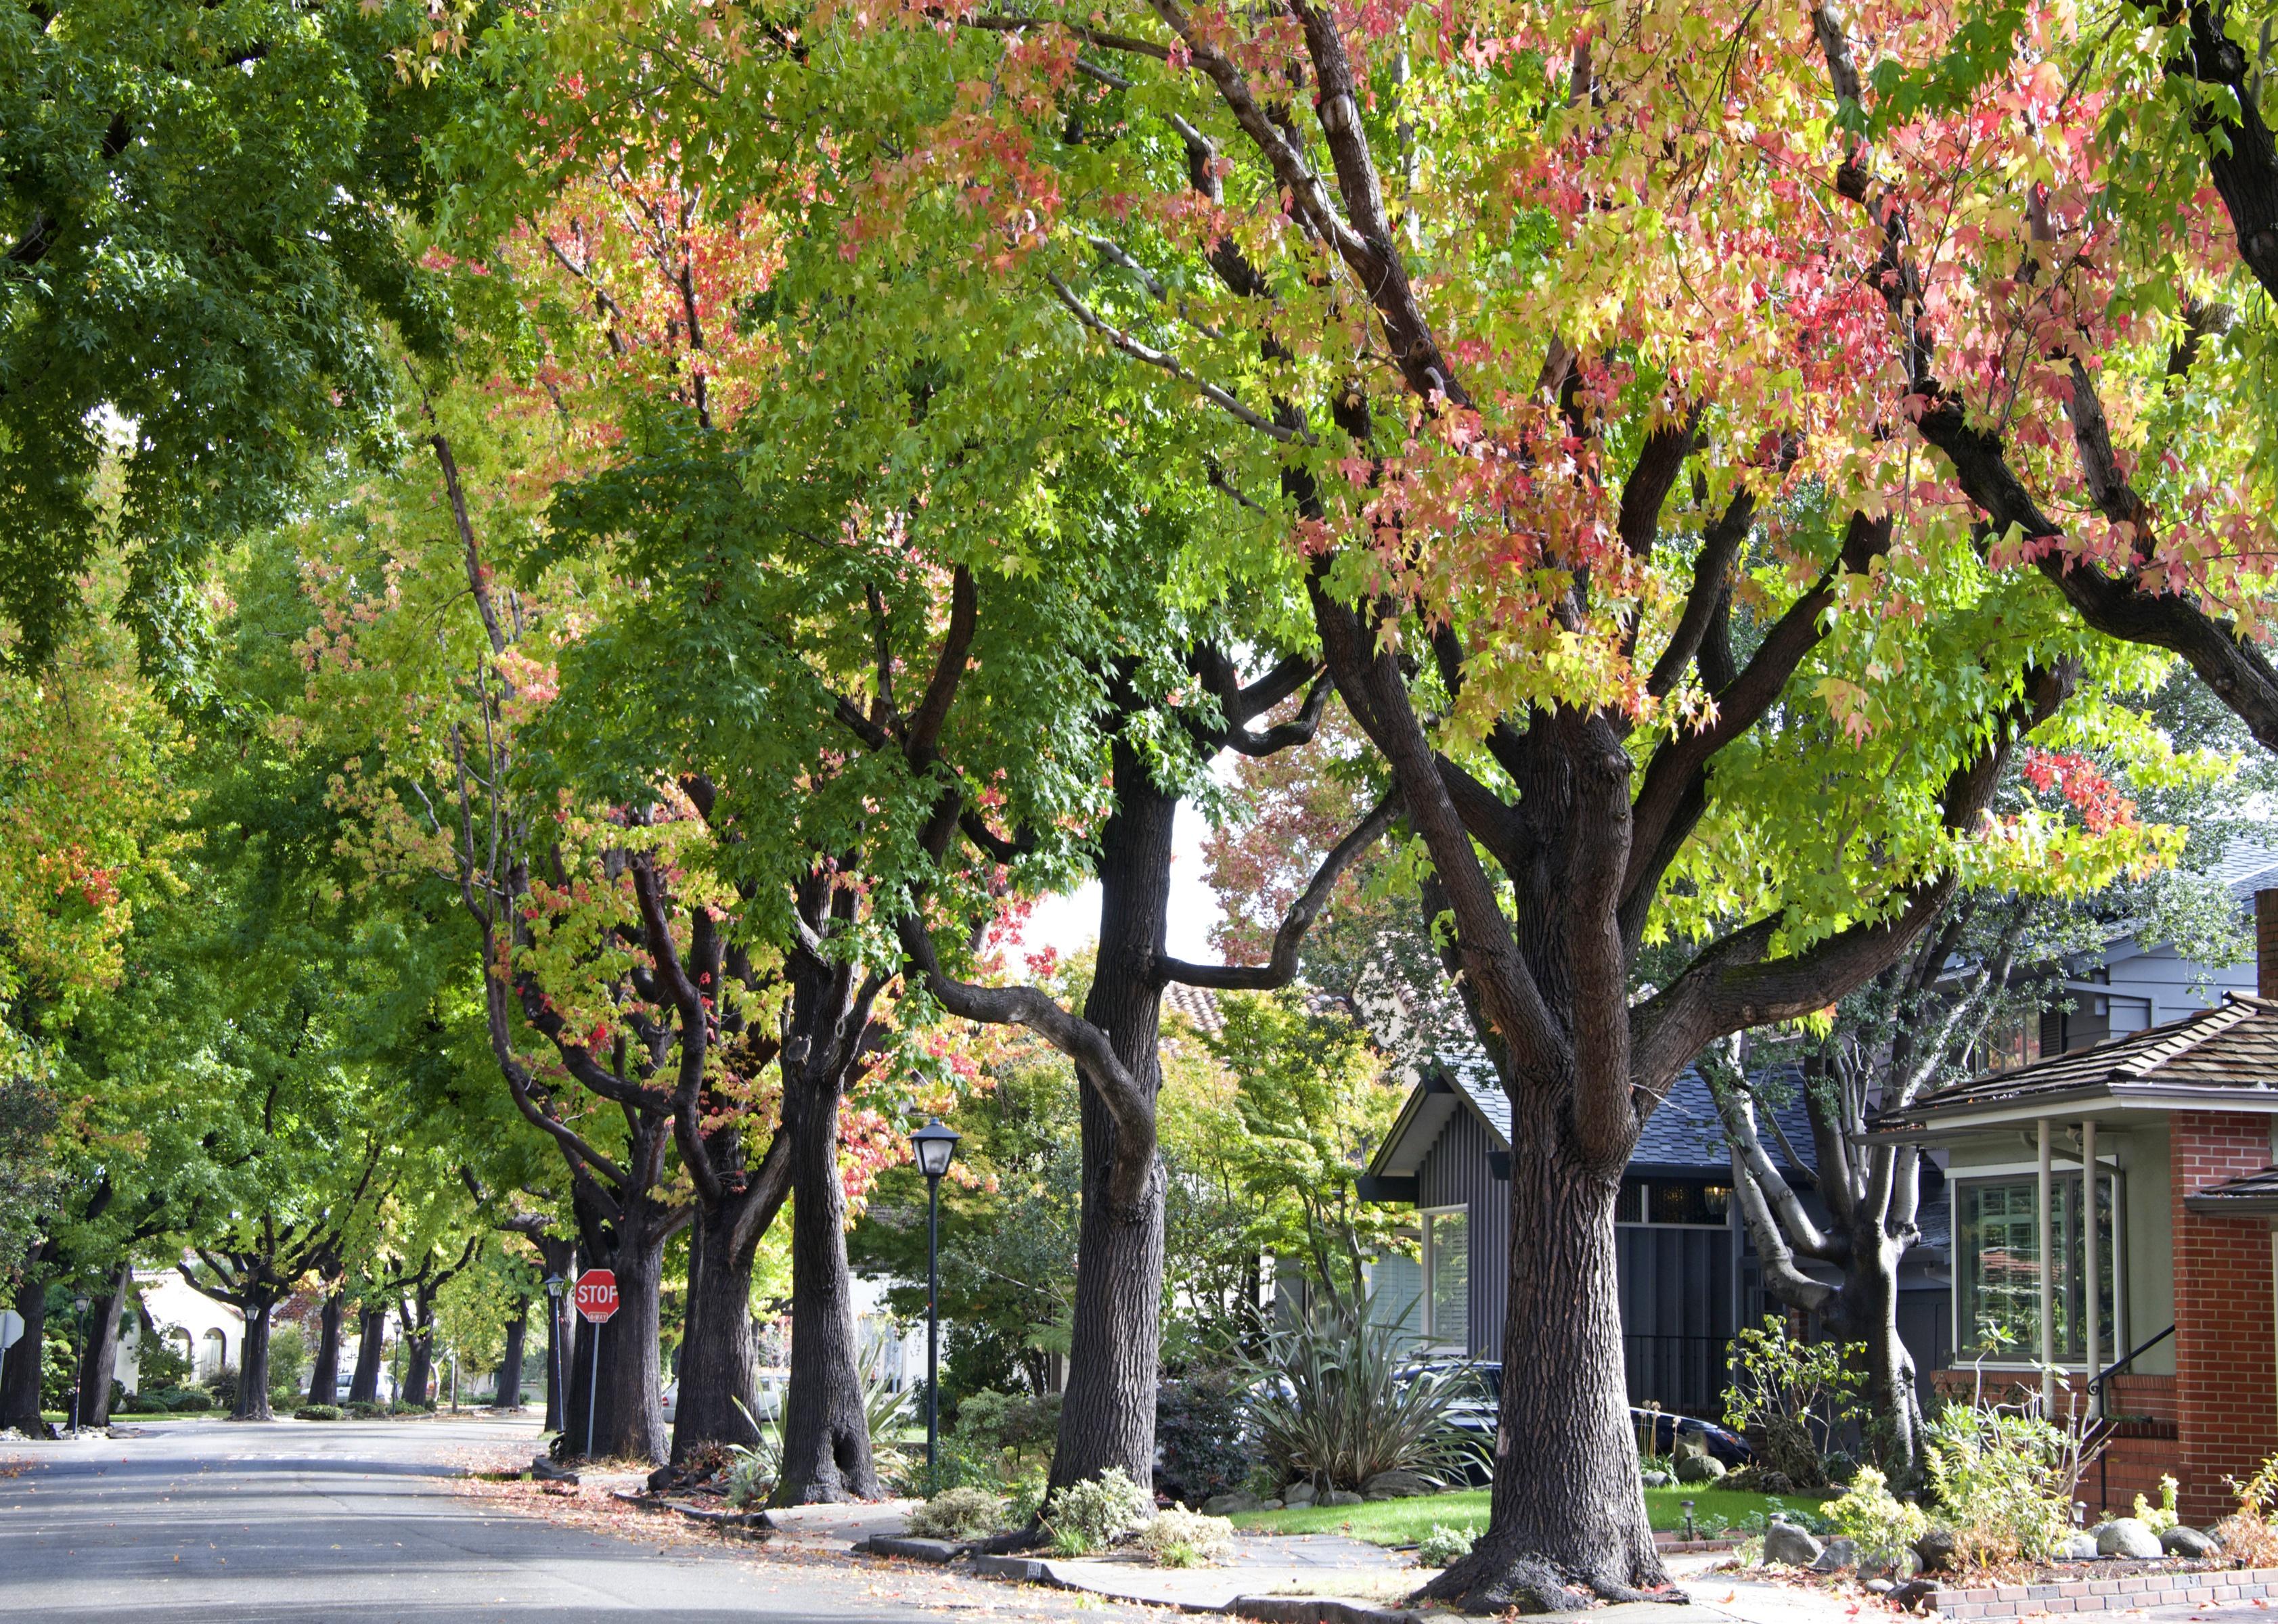 Trees lining a residential street